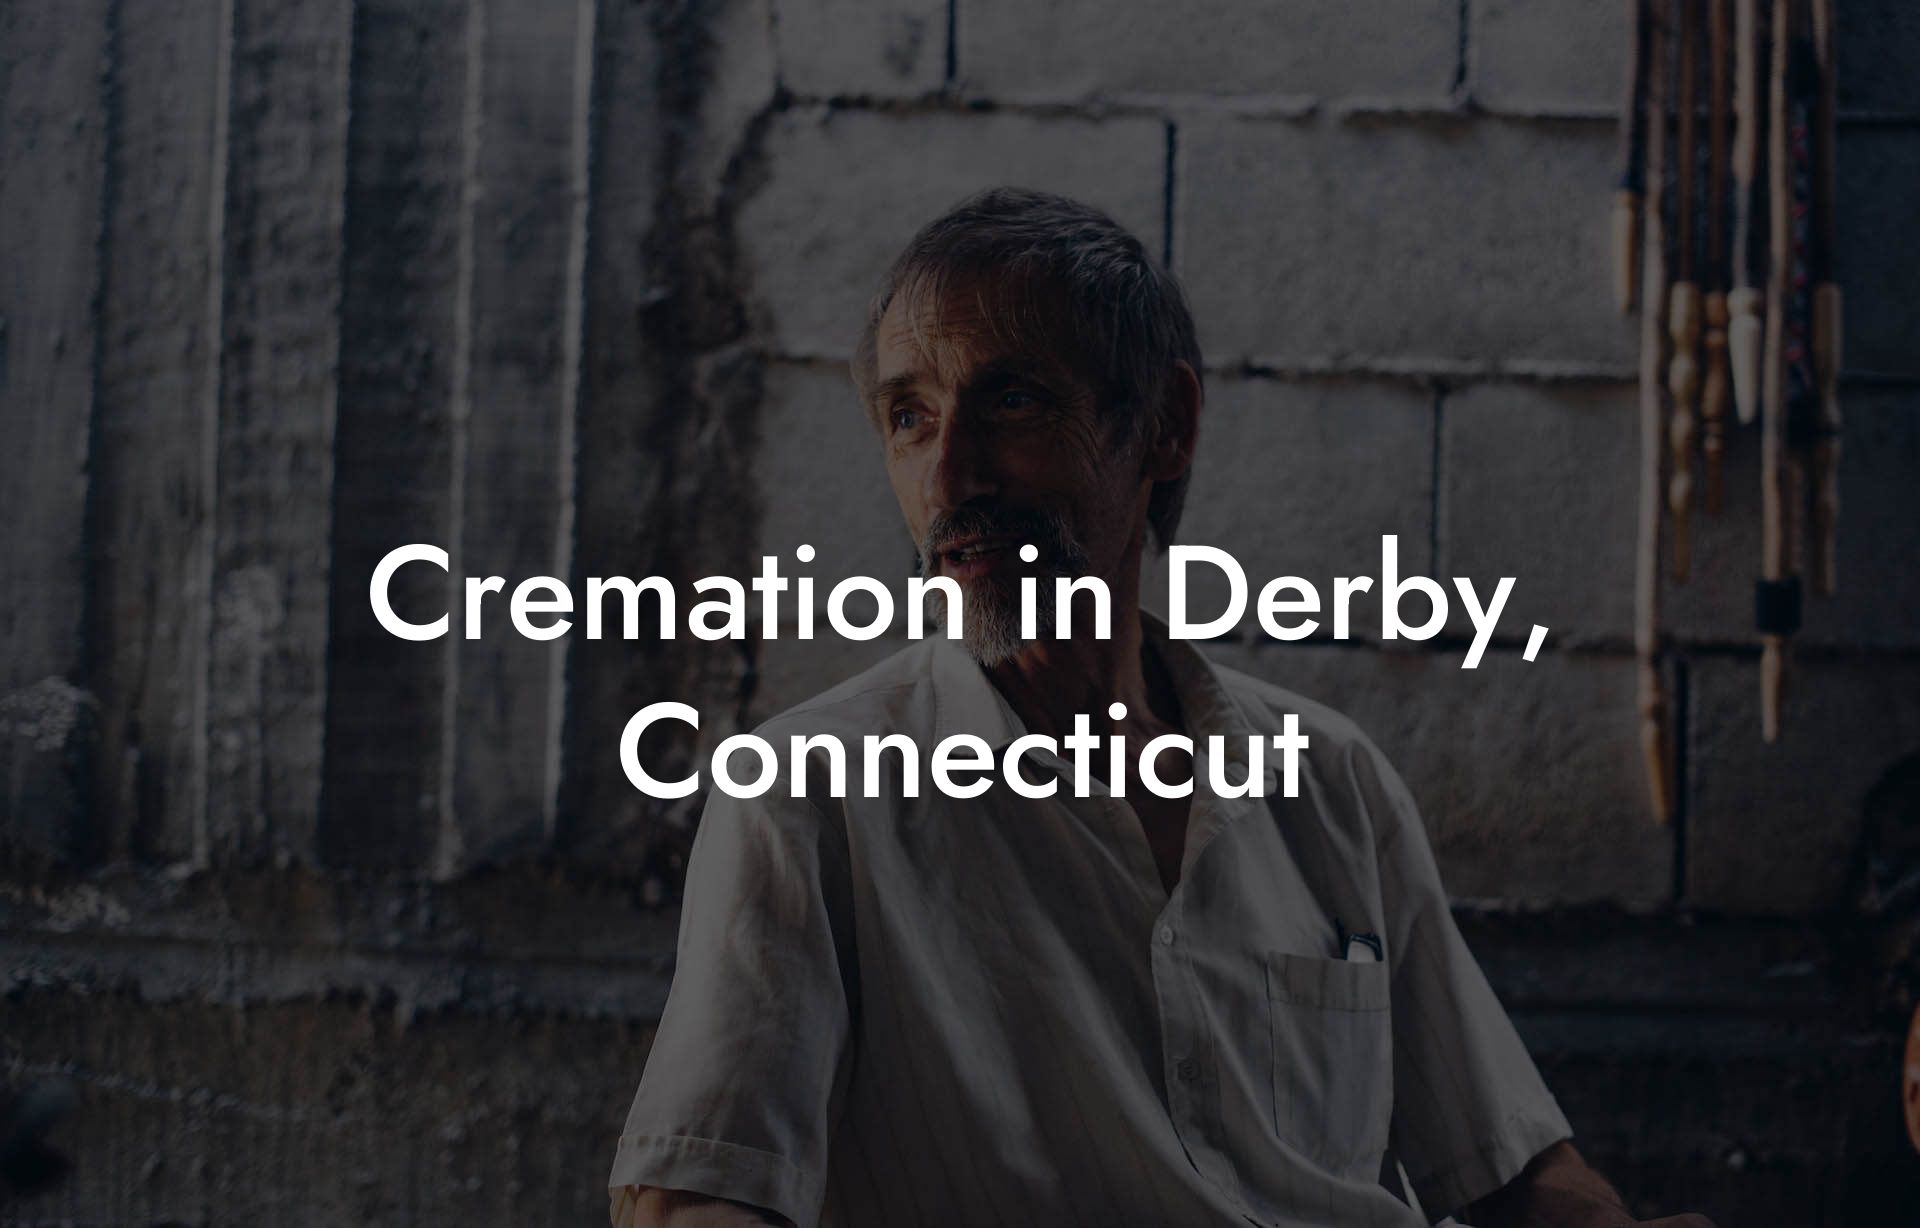 Cremation in Derby, Connecticut